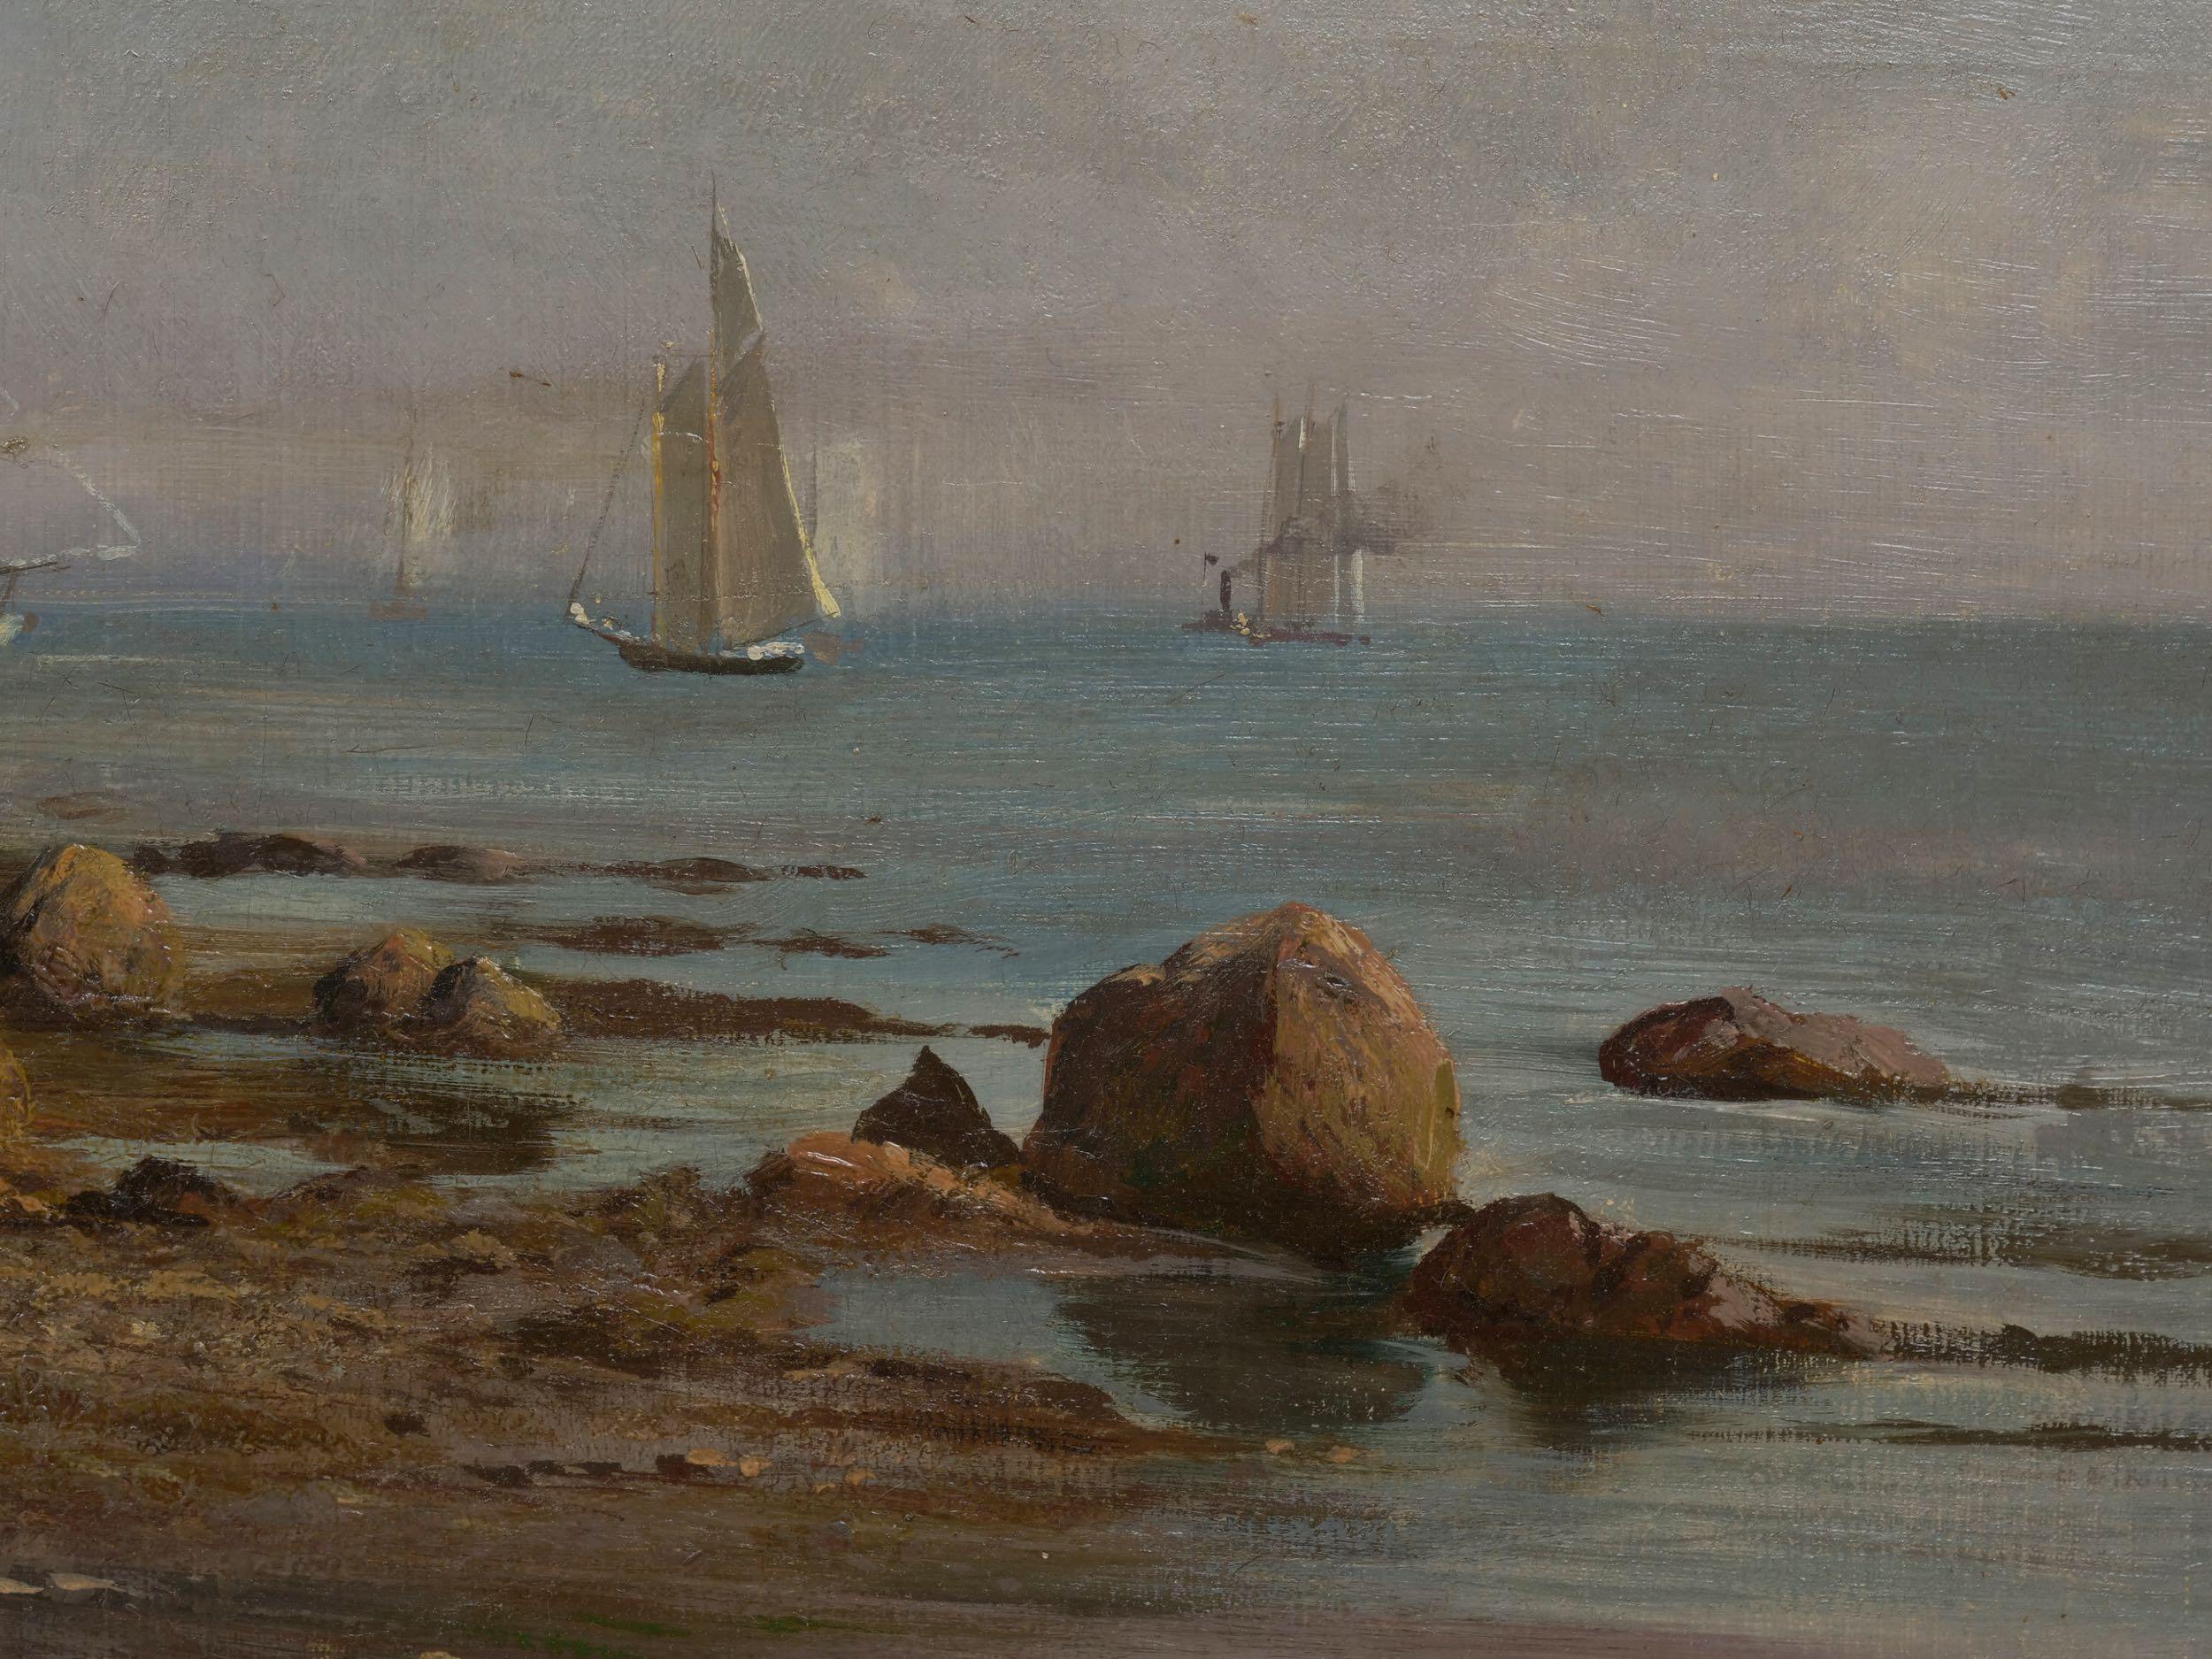 American Landscape Painting “Boats off a Rocky Coast” by Carl Philipp Weber 1